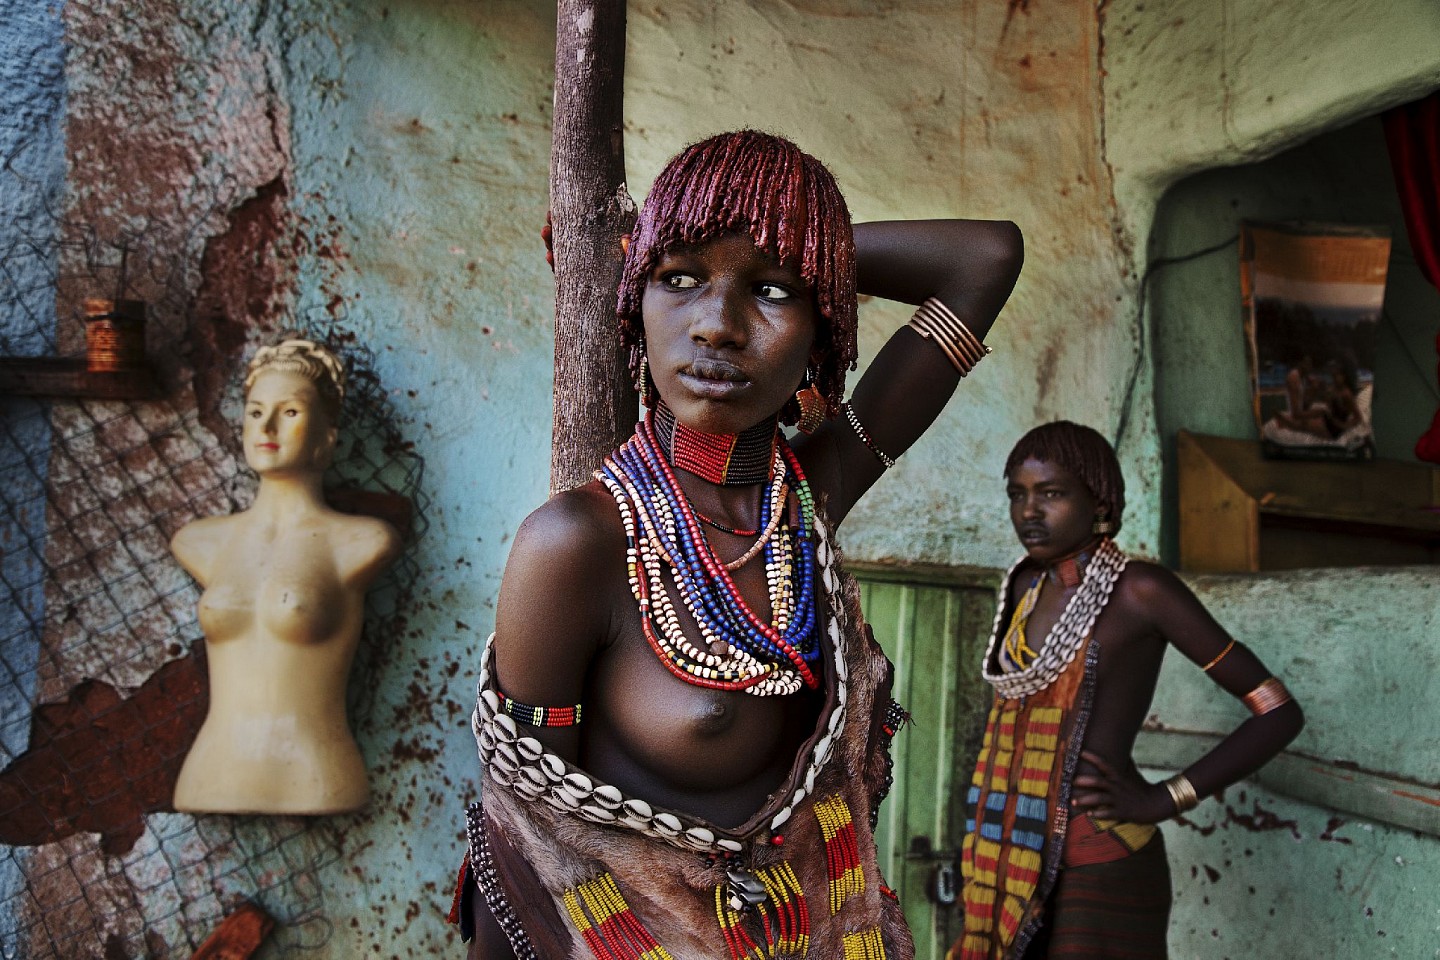 Steve McCurry, Women of Hammer Tribe, 2012
FujiFlex Crystal Archive Print
Price/Size on request